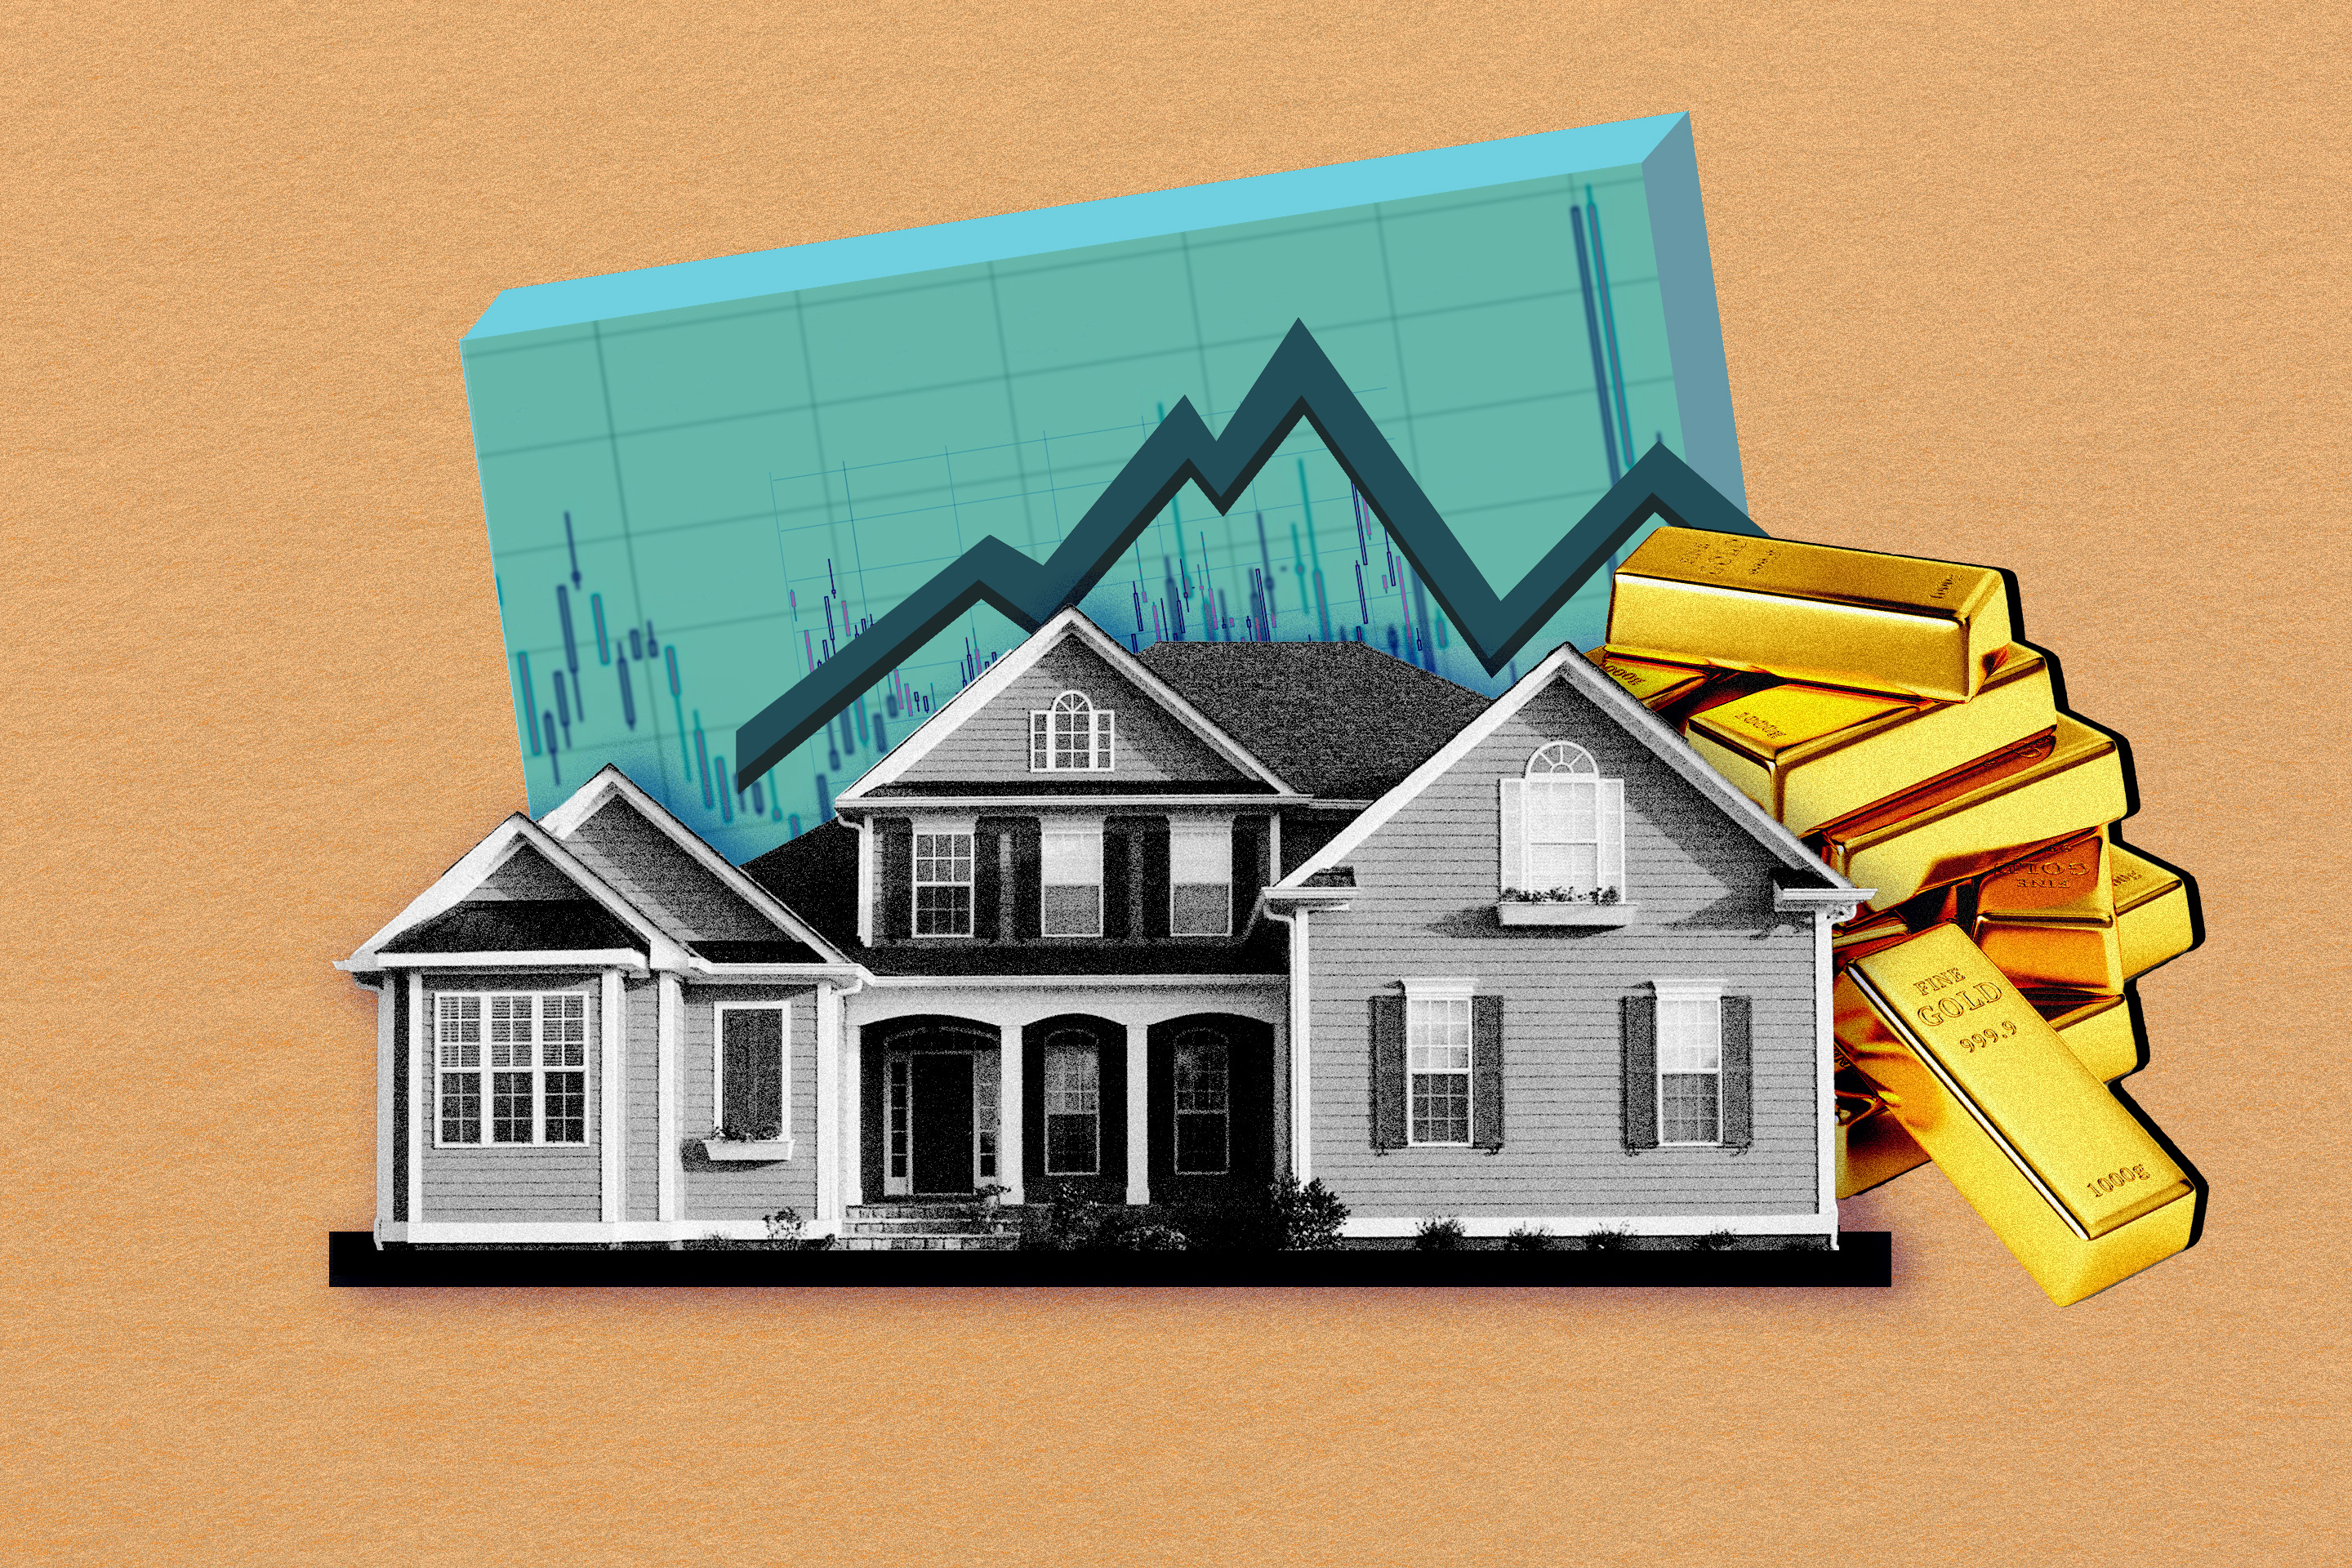 Stocks, Real Estate or Gold? Here’s What People Think the Best Investment Is Now